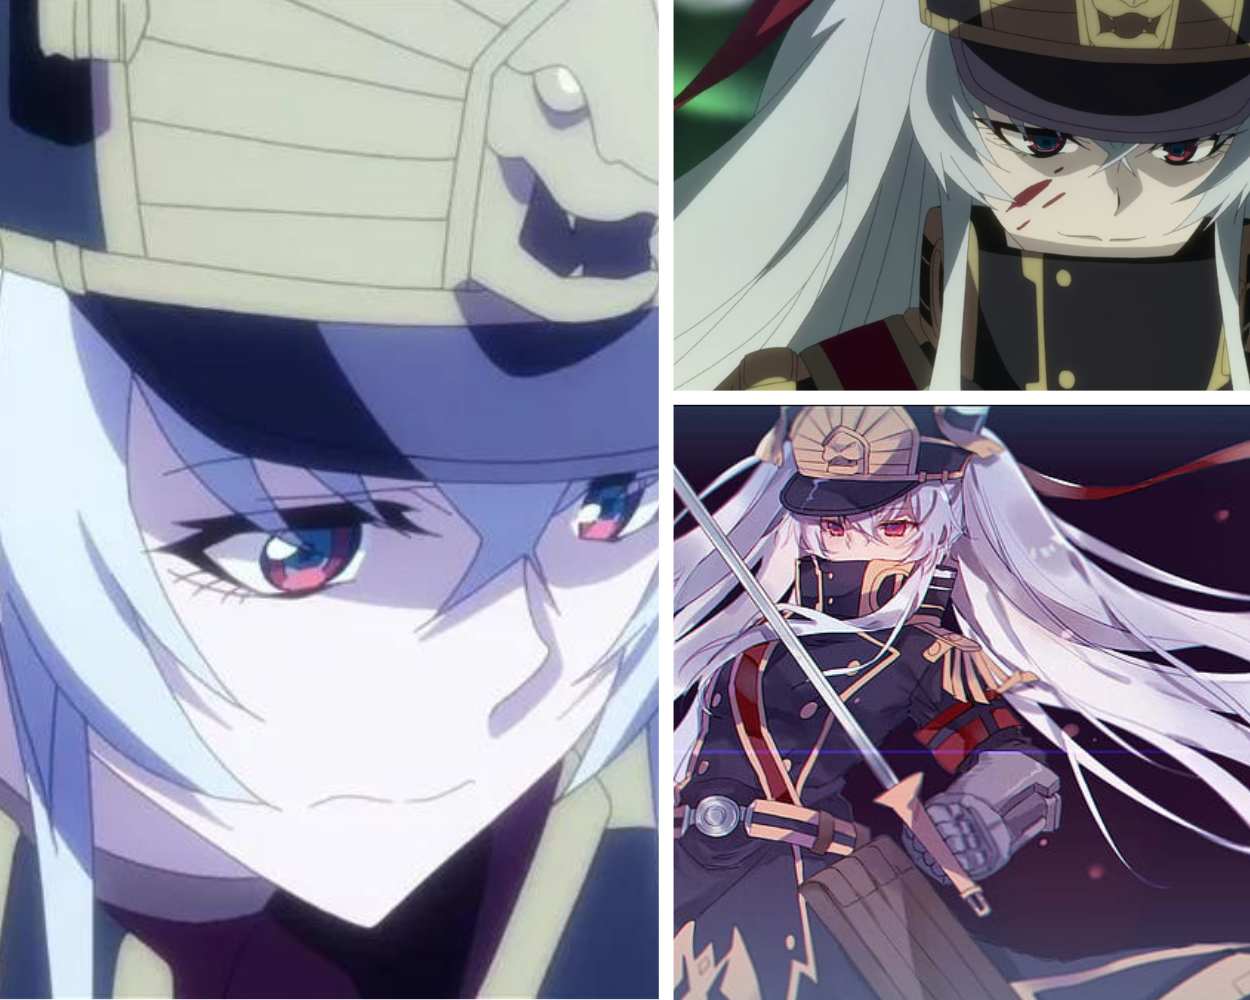 Altair - yandere characters in anime